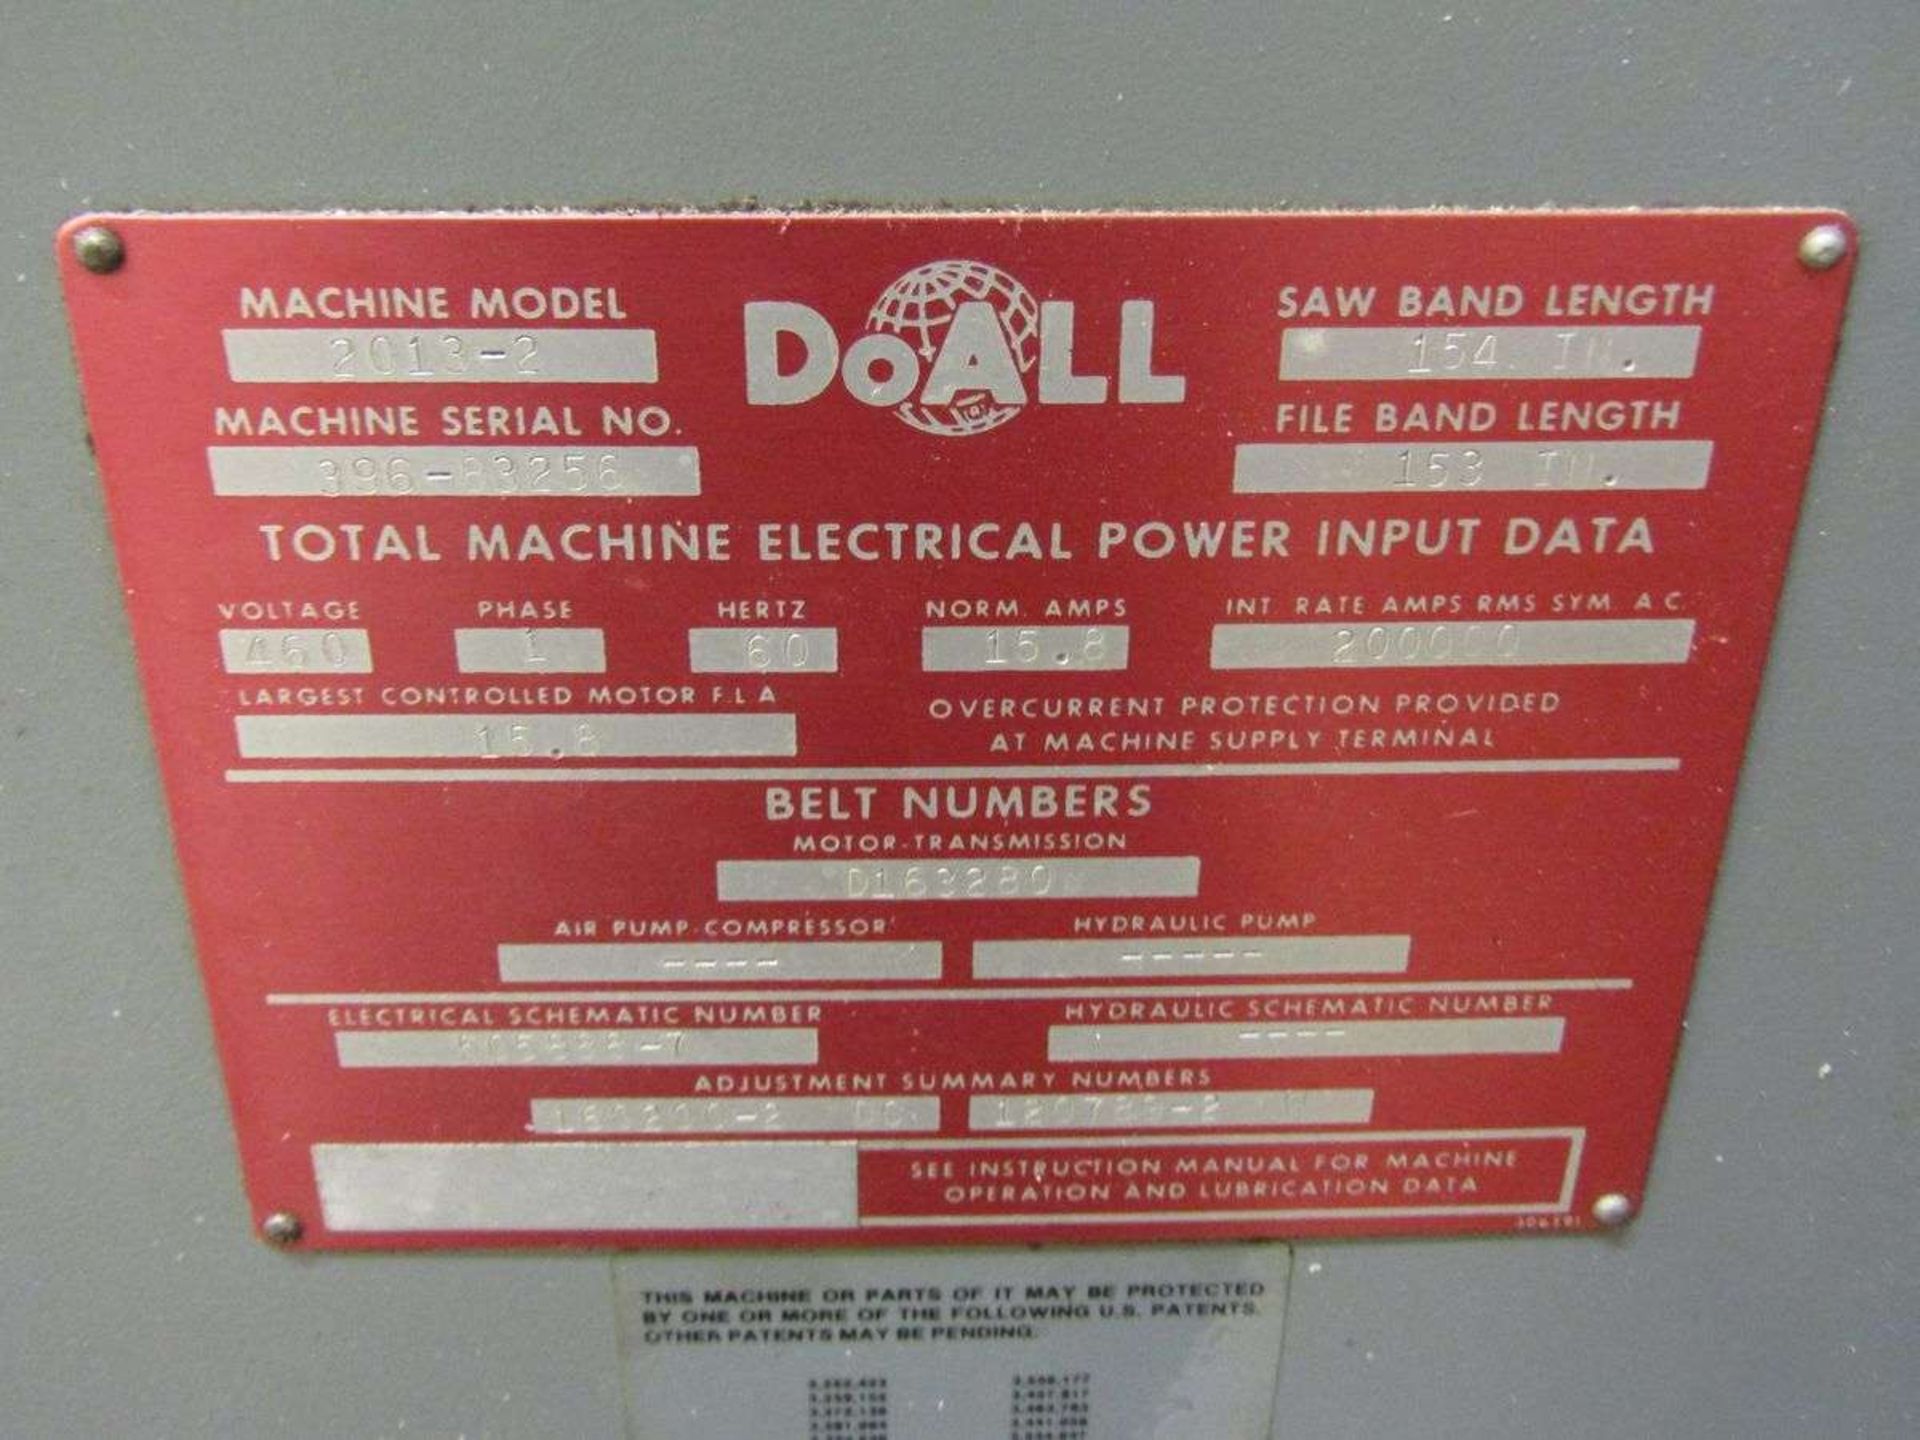 DoAll 20" Vertical Band Saw, Model 2013-2 - Image 7 of 7